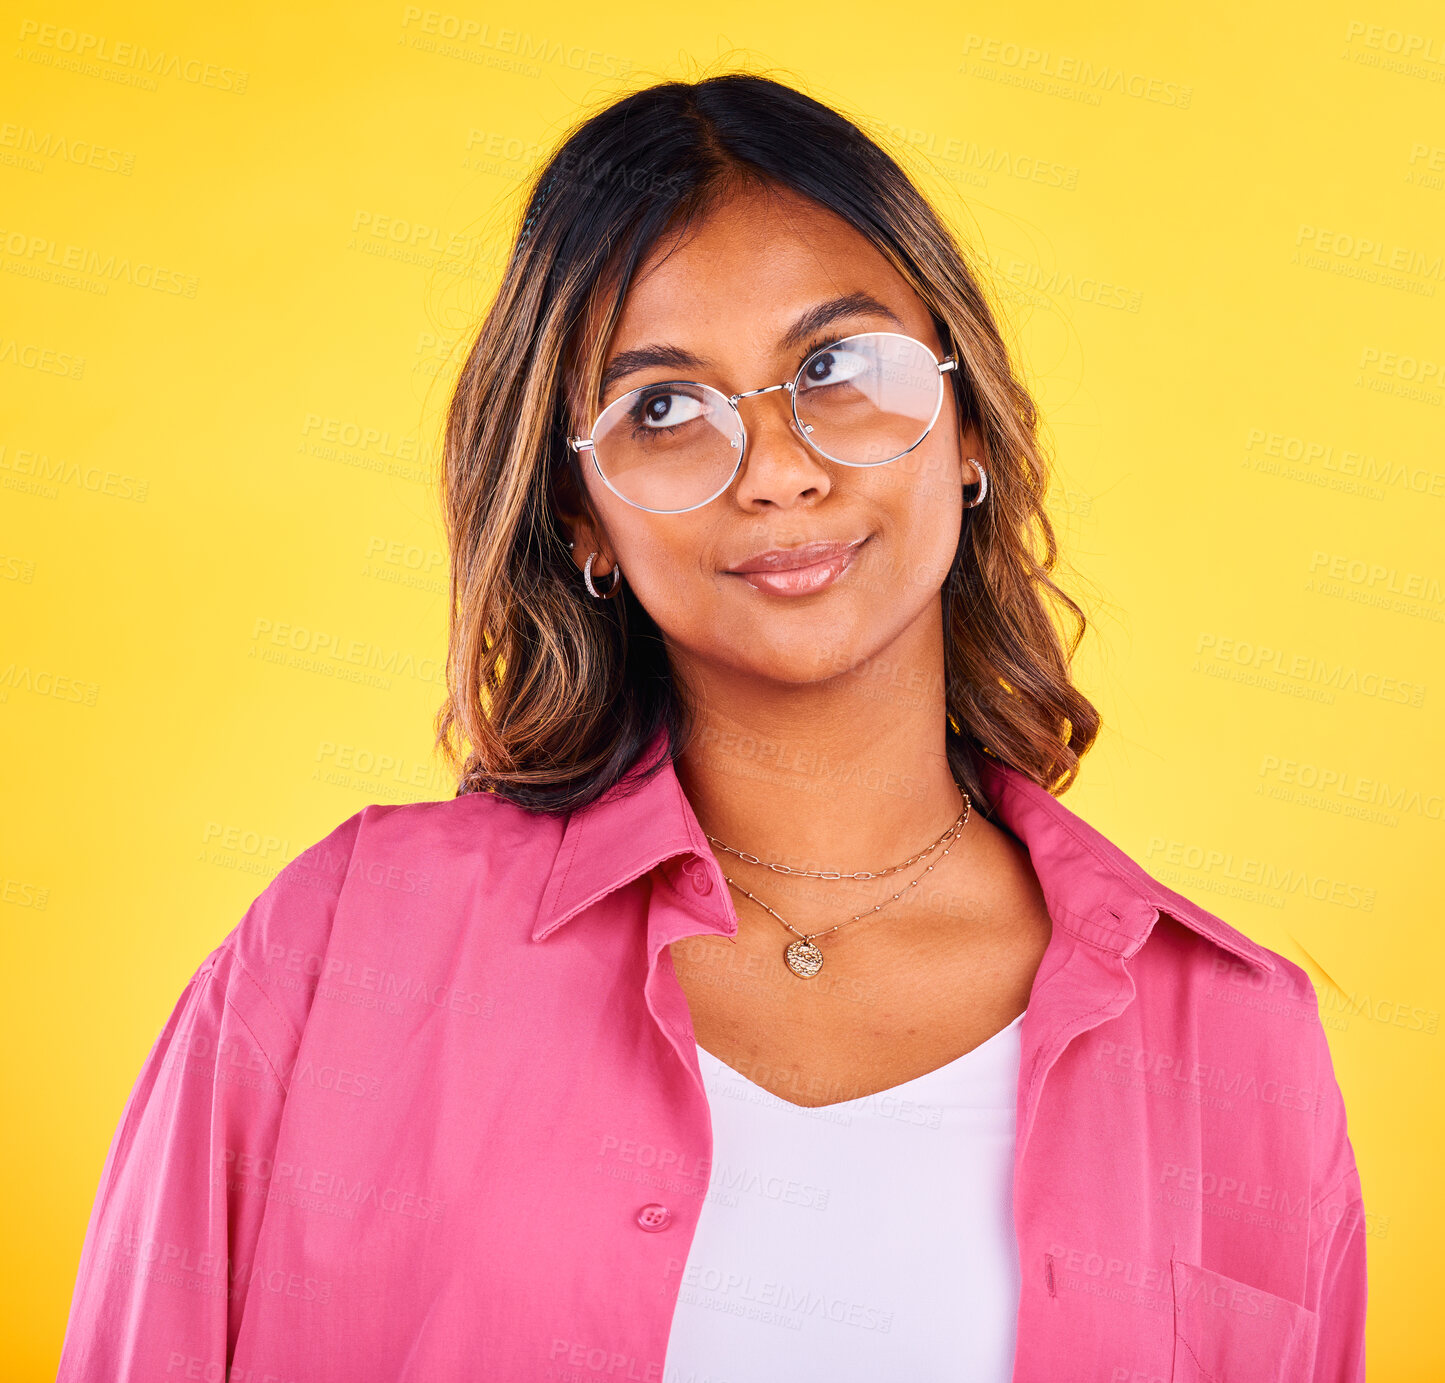 Buy stock photo Thinking, fashion and face of woman on yellow background with ideas, confidence and thought. Beauty, style and isolated person with attitude in trendy clothes, stylish outfit and glasses in studio